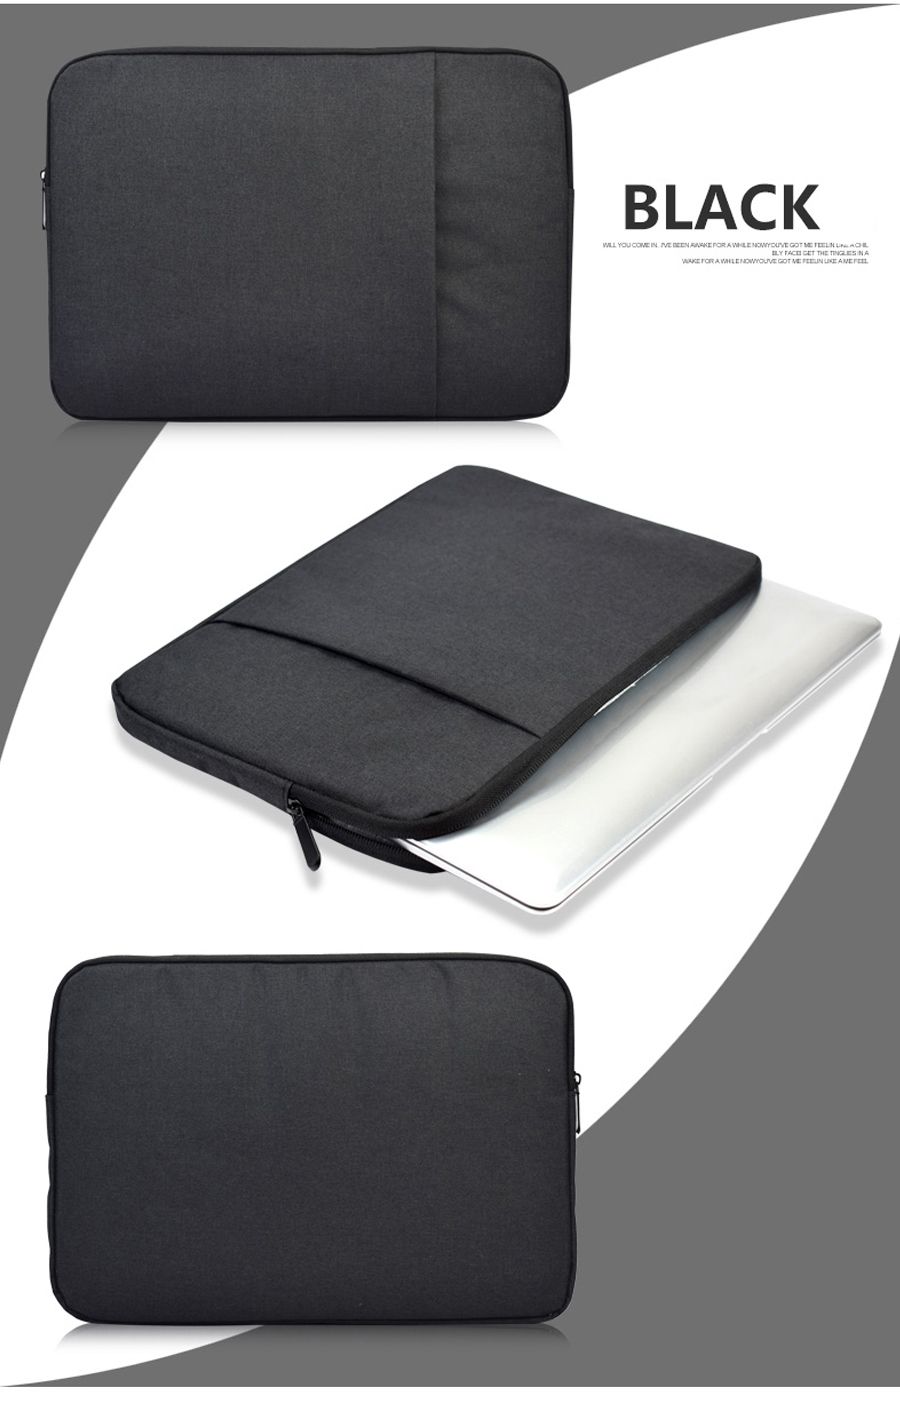 13-Inch-Protective-Sleeve-Soft-Inner-Case-Cover-Bag-For-Tablet-PC-1148838